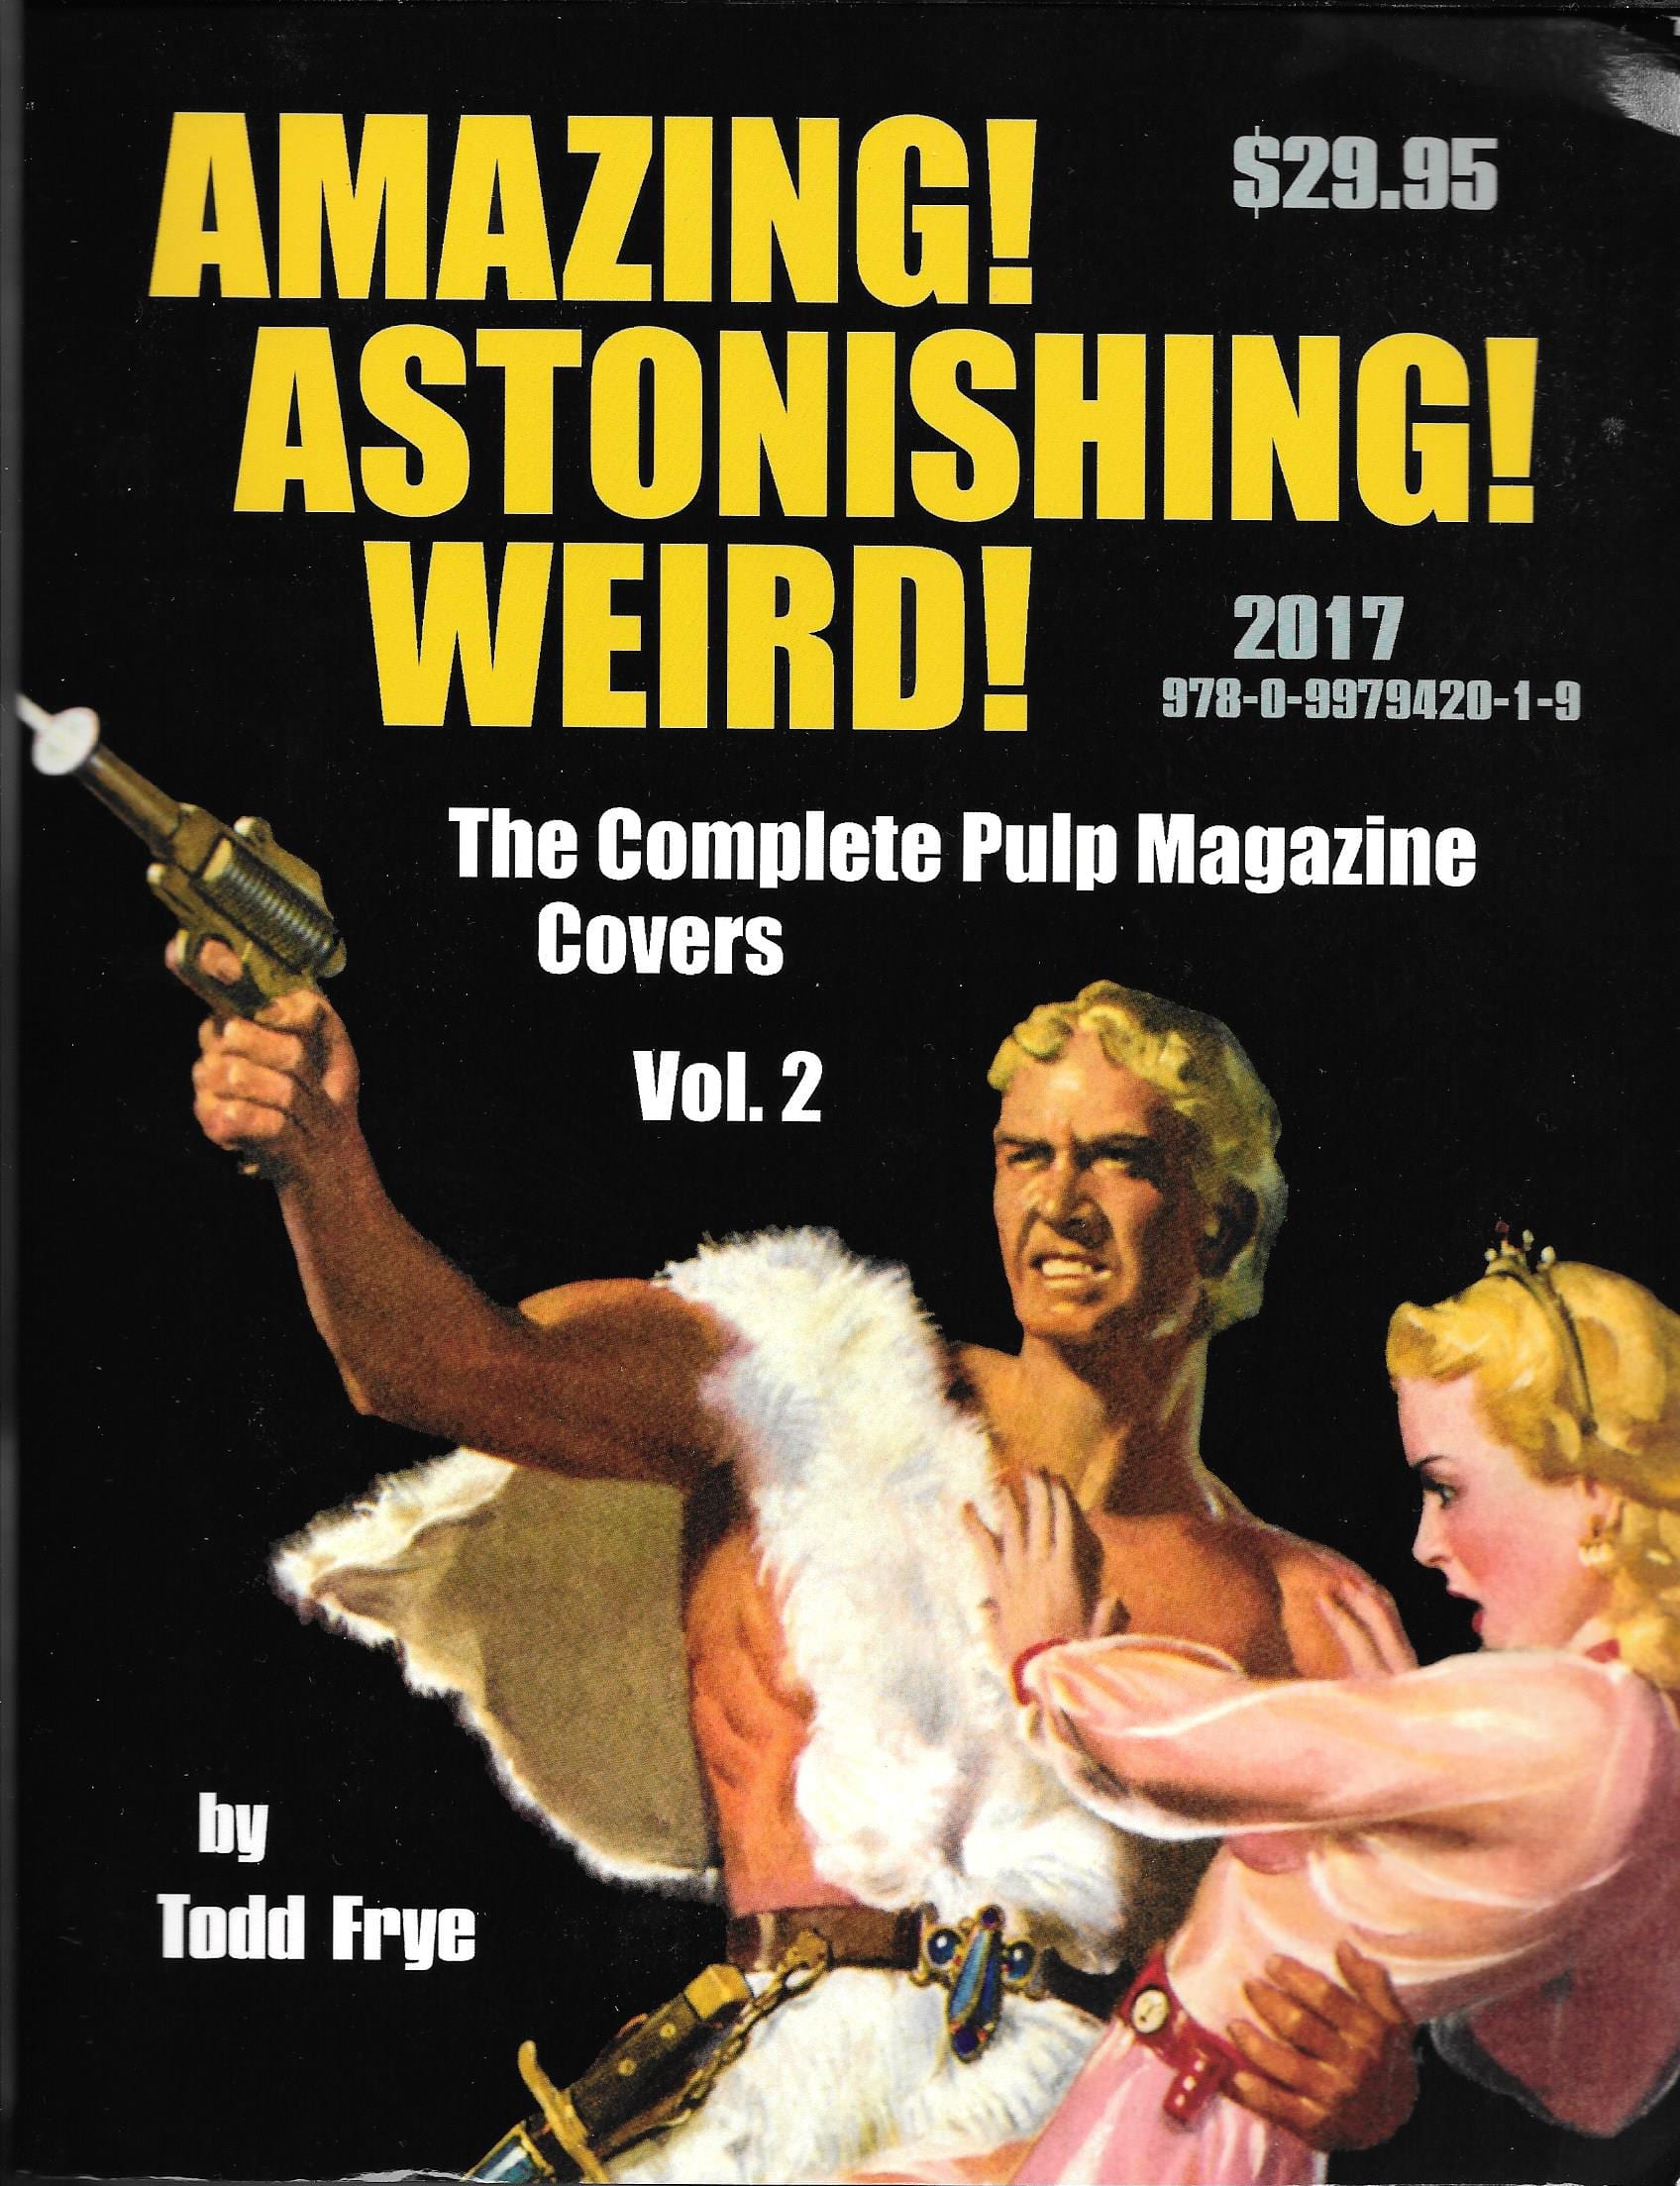 AMAZING! ASTONISHING! WEIRD! Book Review By Ron Fortier